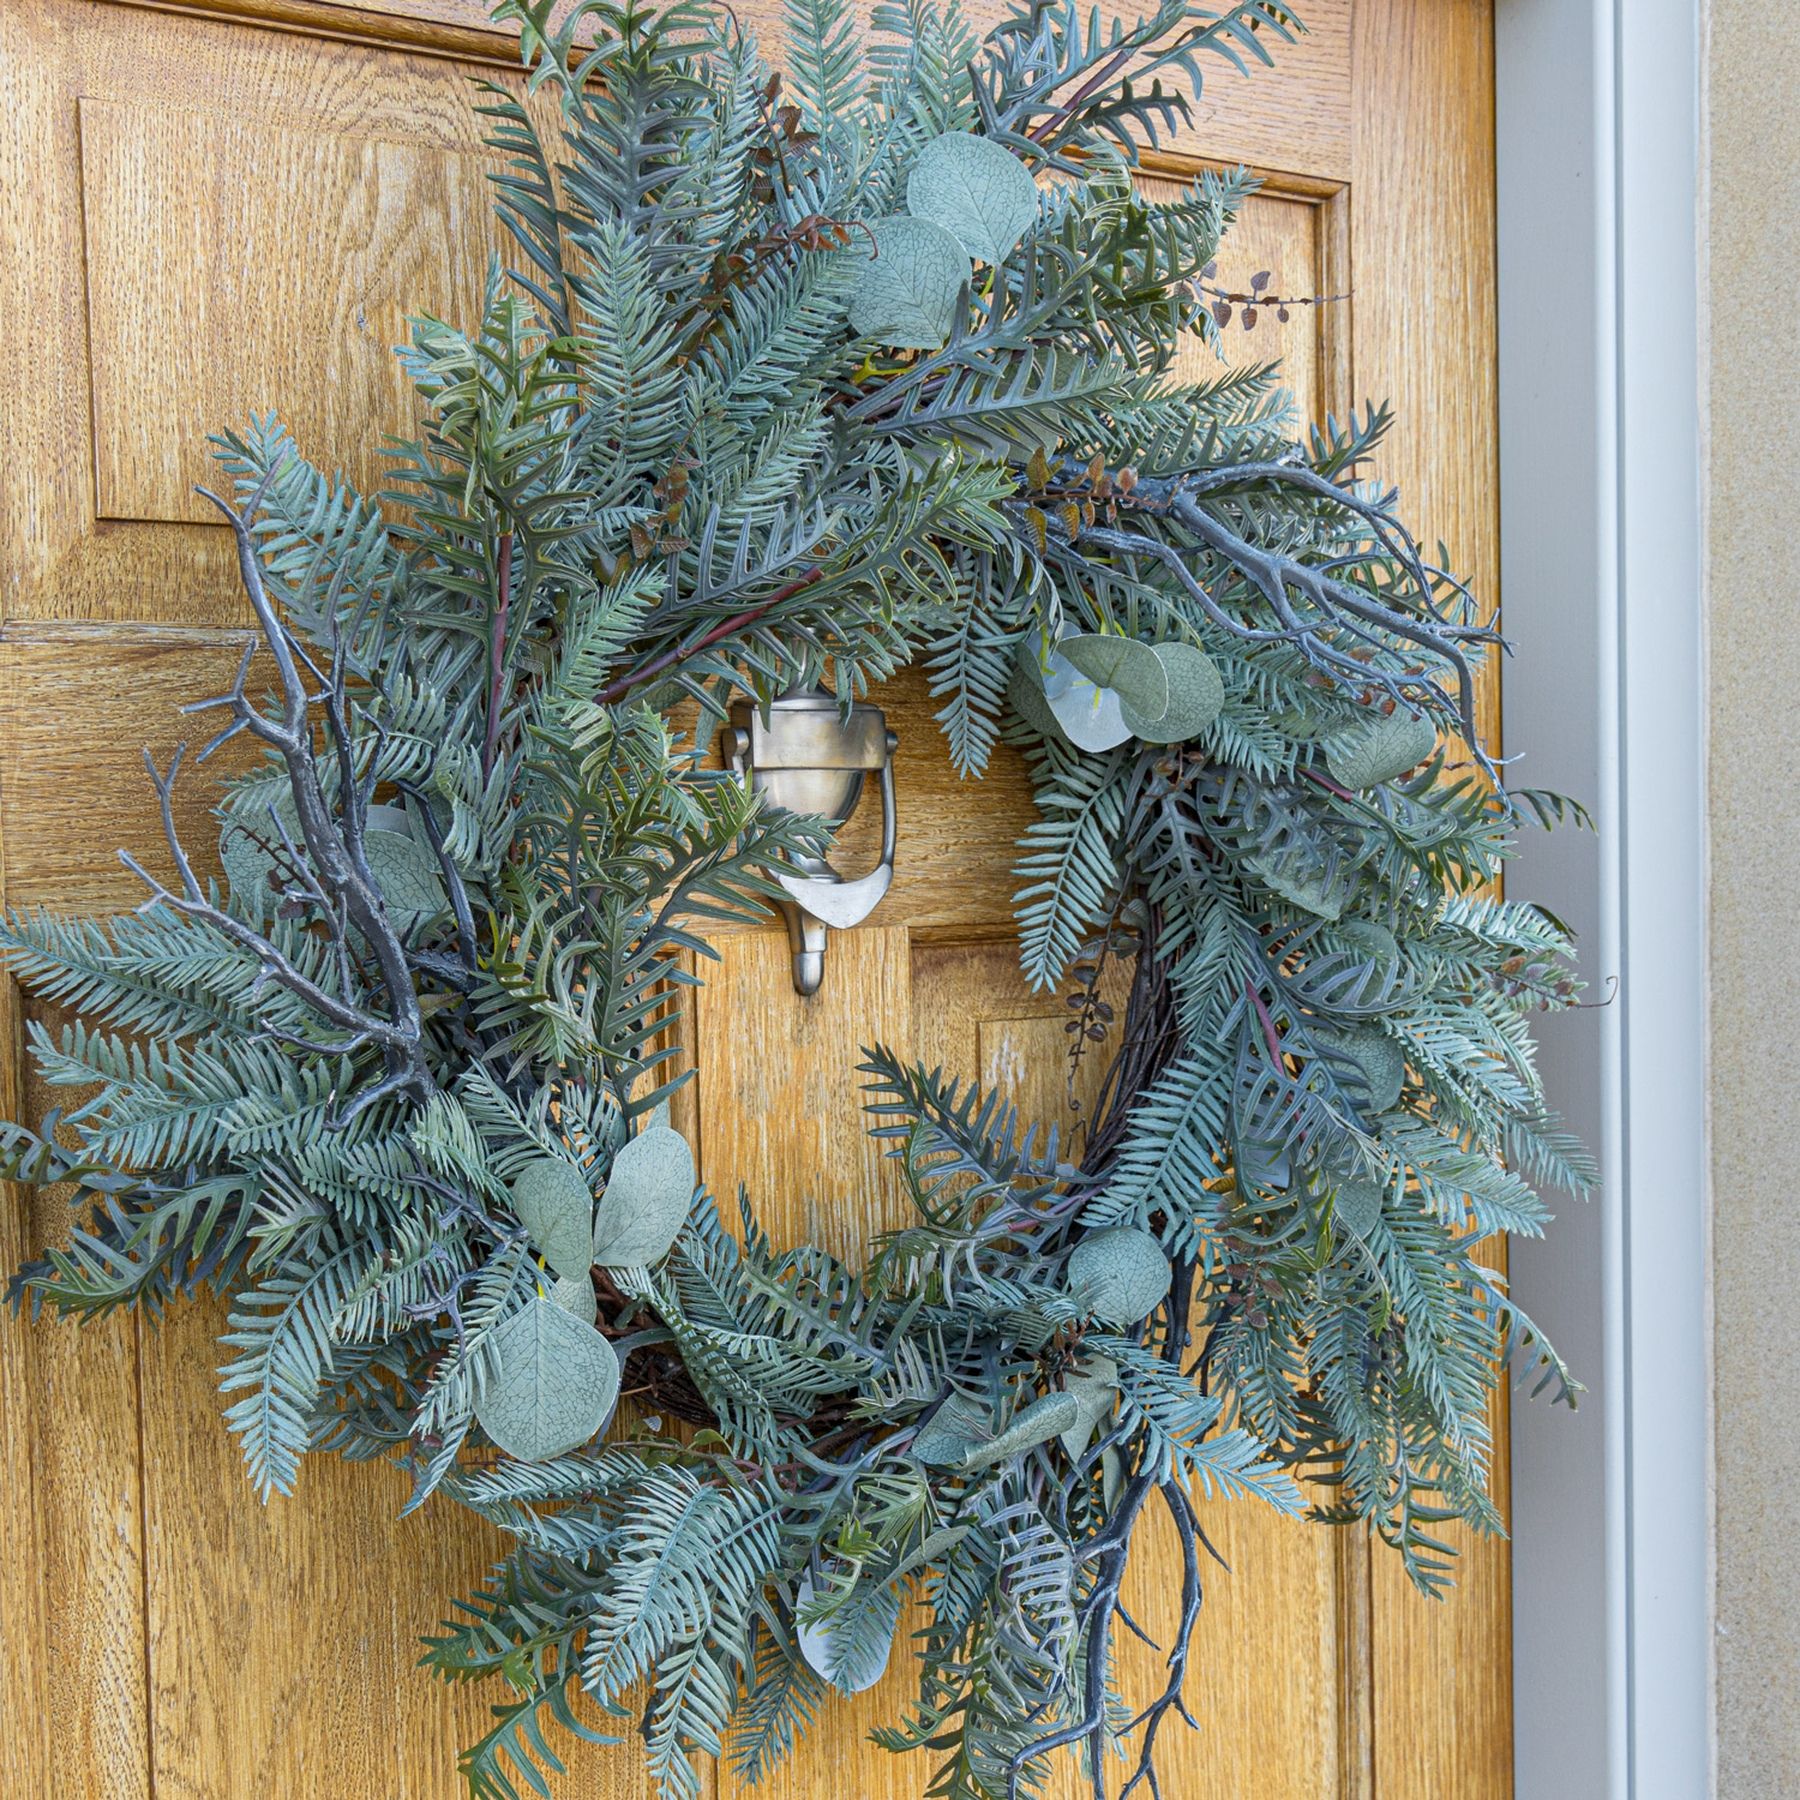 Winter Wreath With Eucalyptus And Fern - Image 4